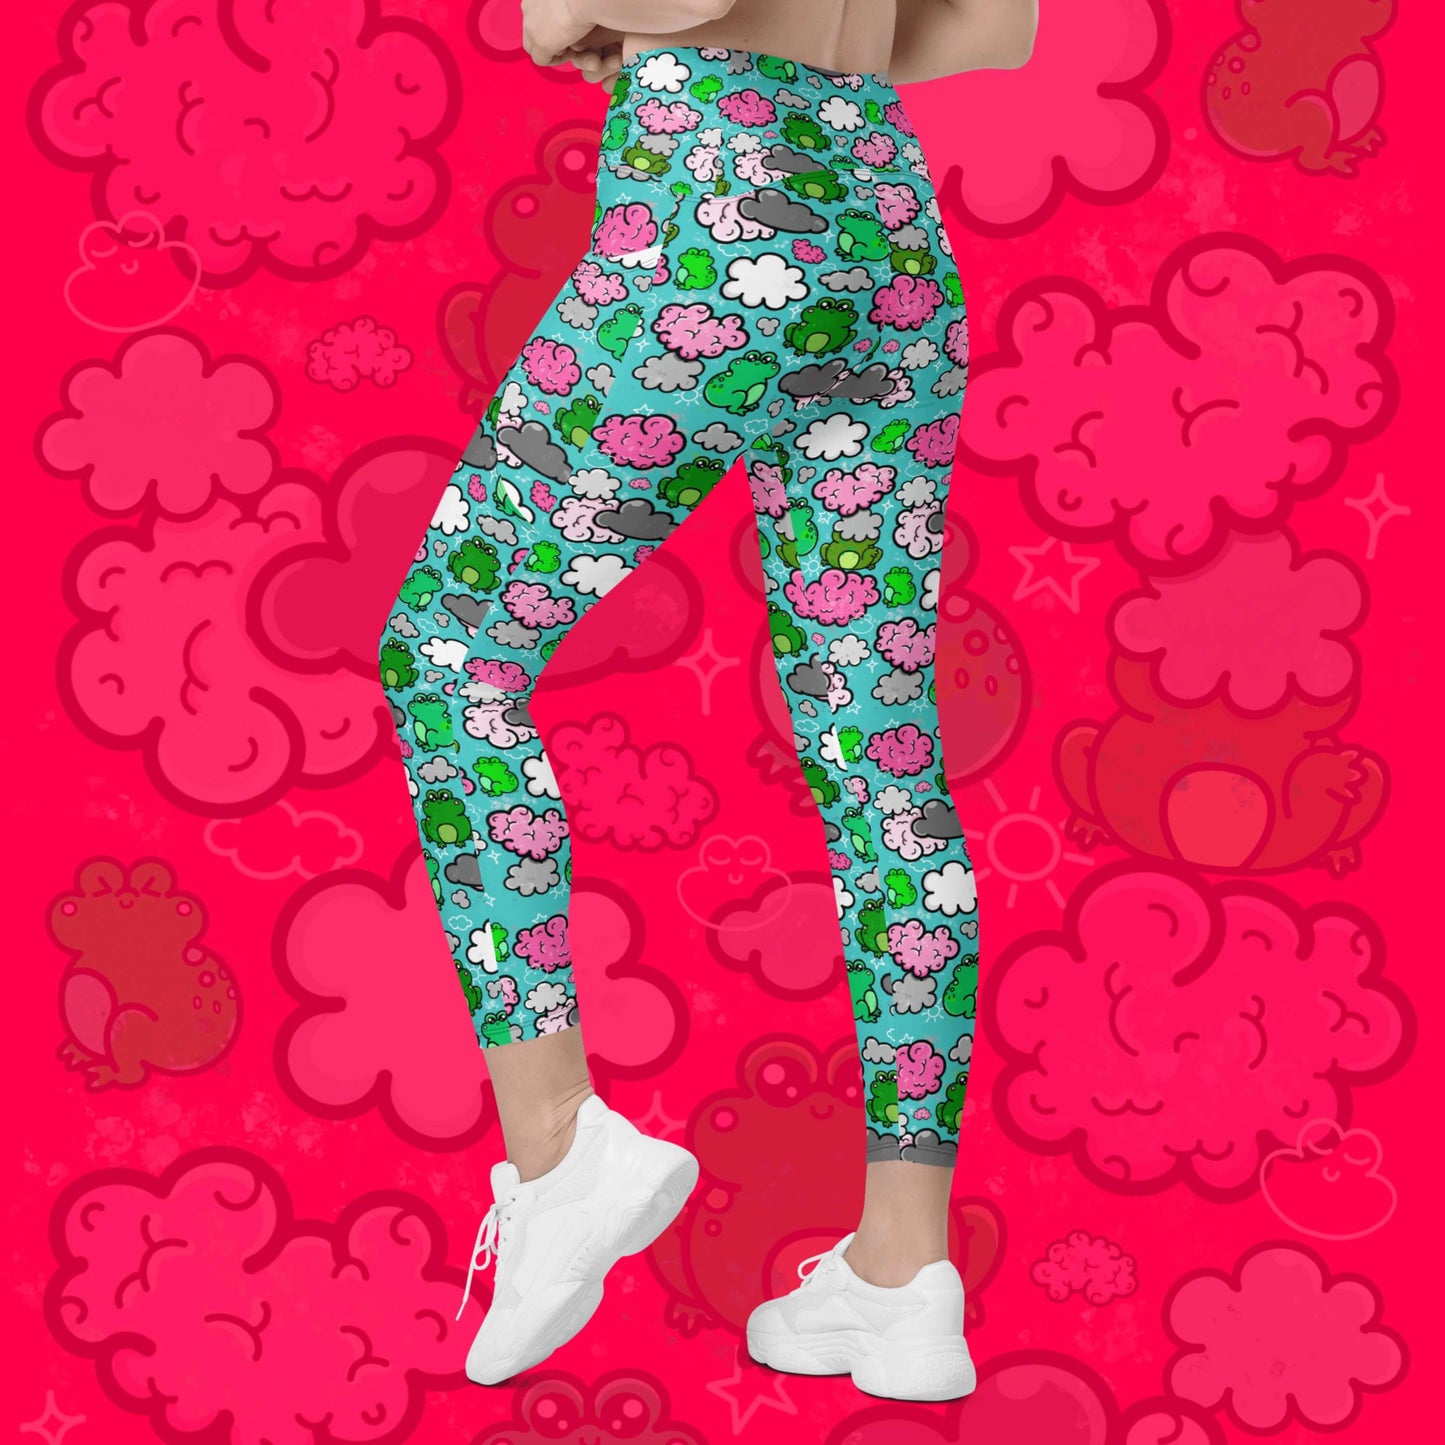 The Brain Frog Leggings with pockets - Brain Fog being worn by a model facing away with their left leg bent on a red background with a faded brain frog print, the photo is cropped from the hips down. The leggings are an aqua blue base with various green kawaii face frogs with pink blush cheeks, pink brain style clouds, white and grey clouds and white sparkles all over. The design was created to raise awareness of Brain Fog.